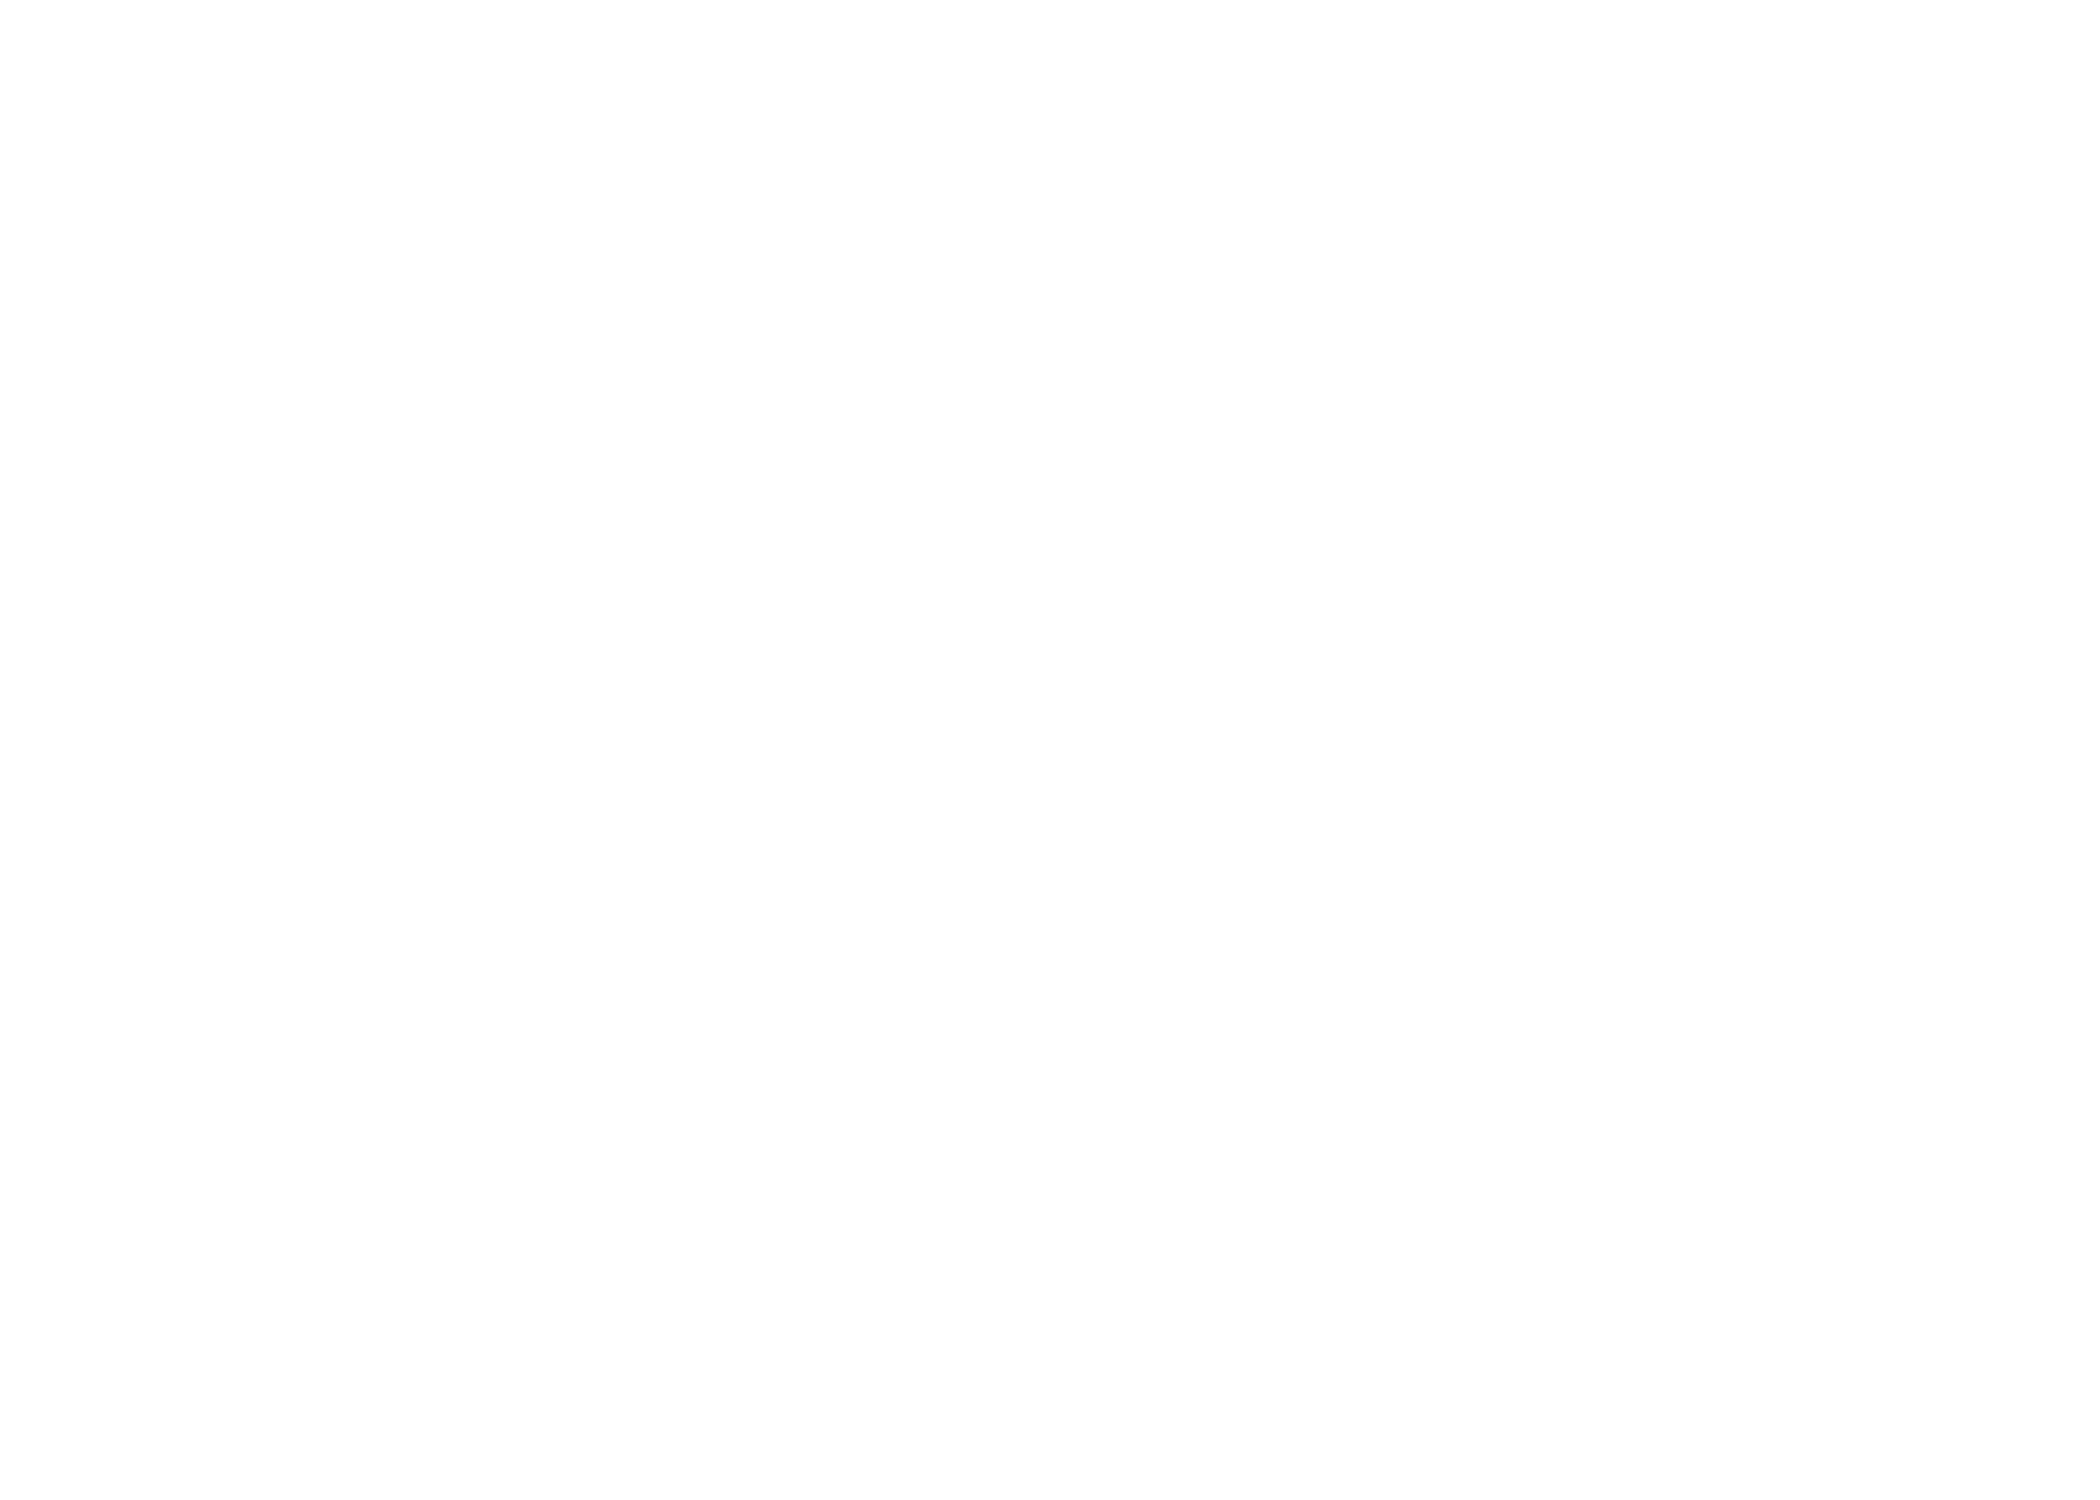 The Butcher's Tap